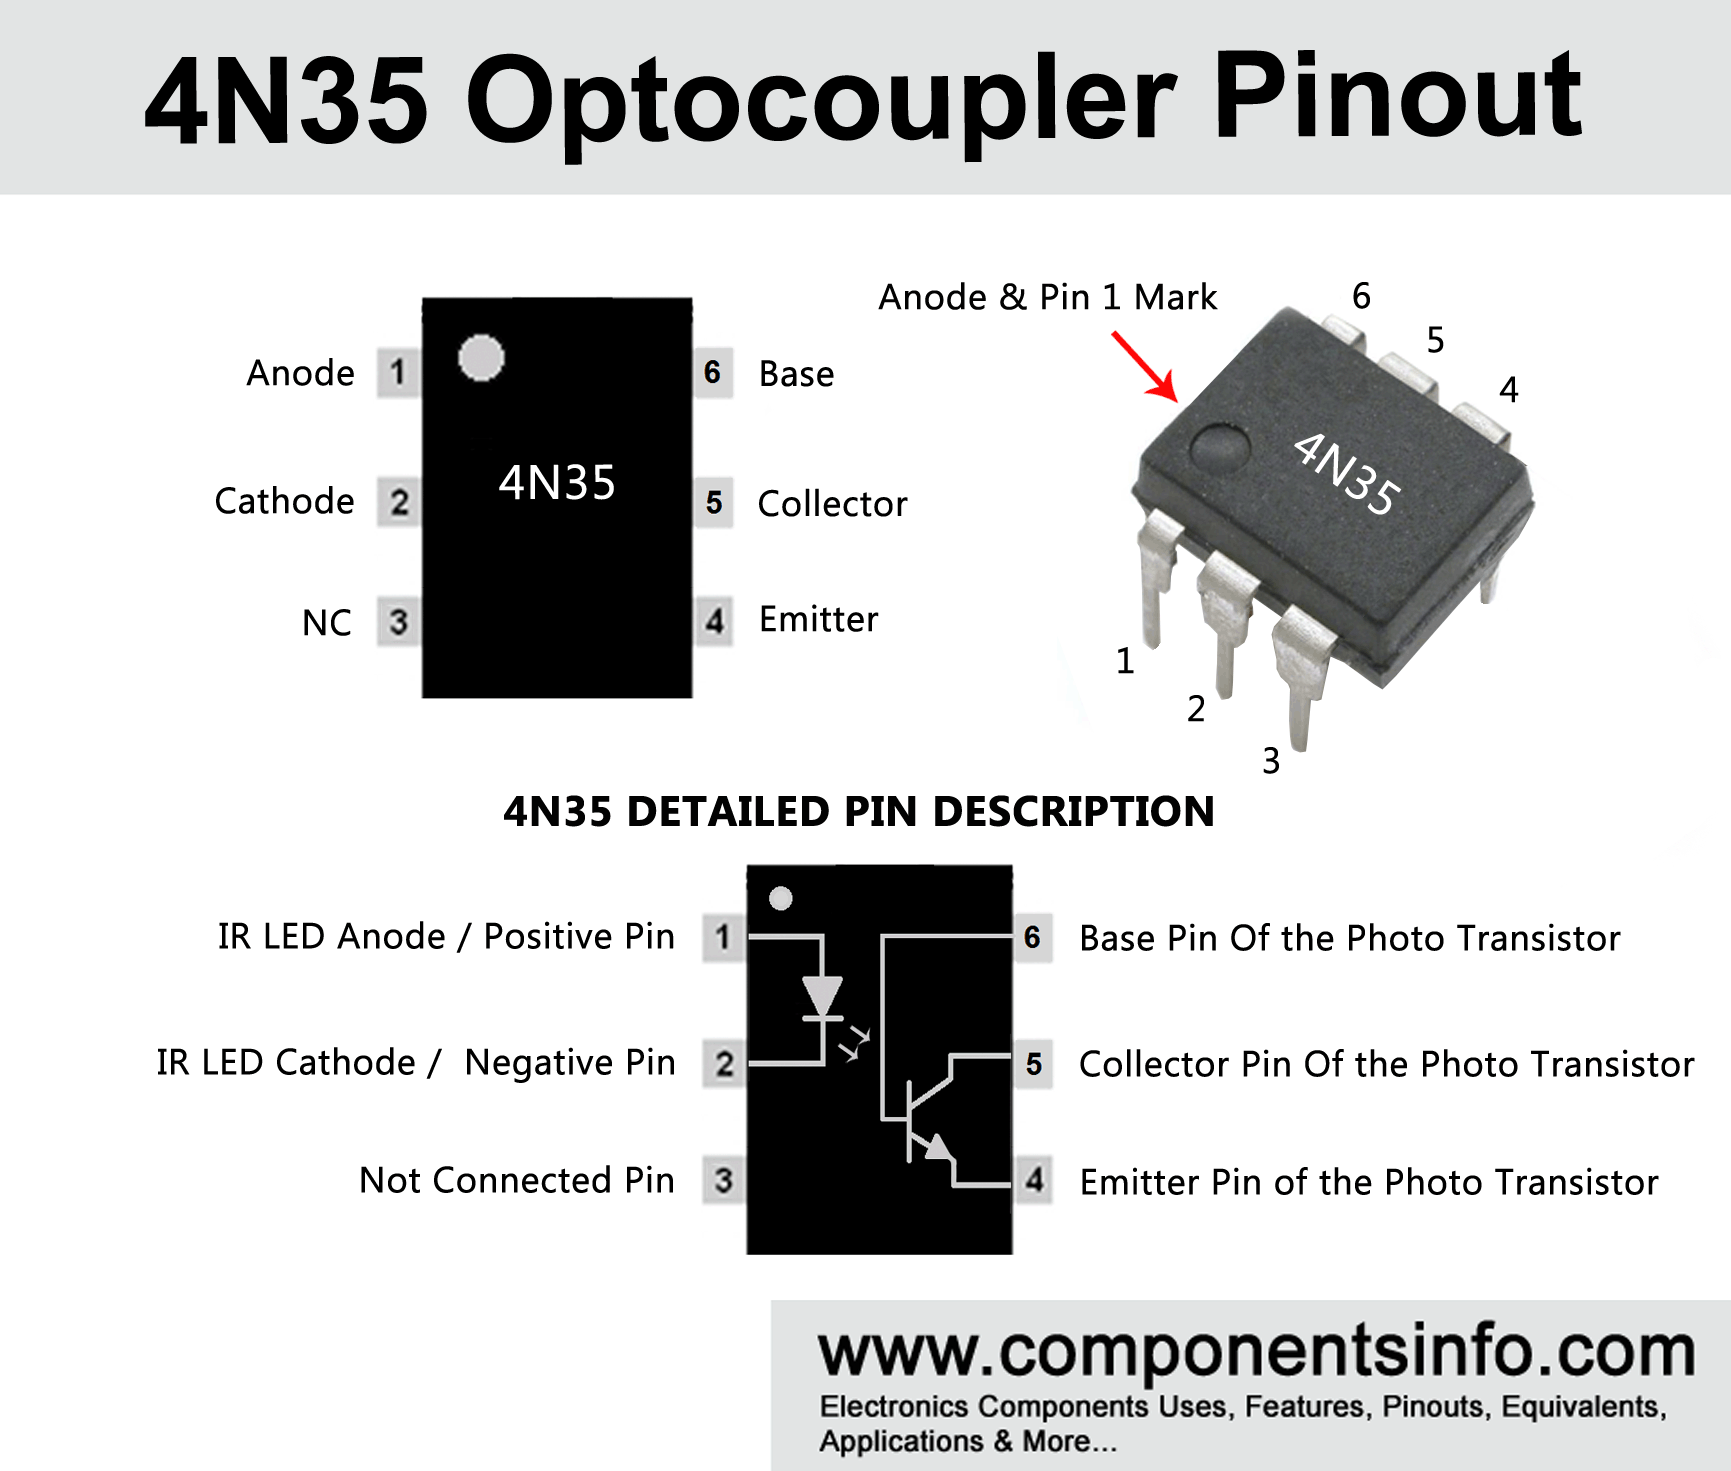 4N35 Optocoupler Pinout, Datasheet, Equivalent & Other information